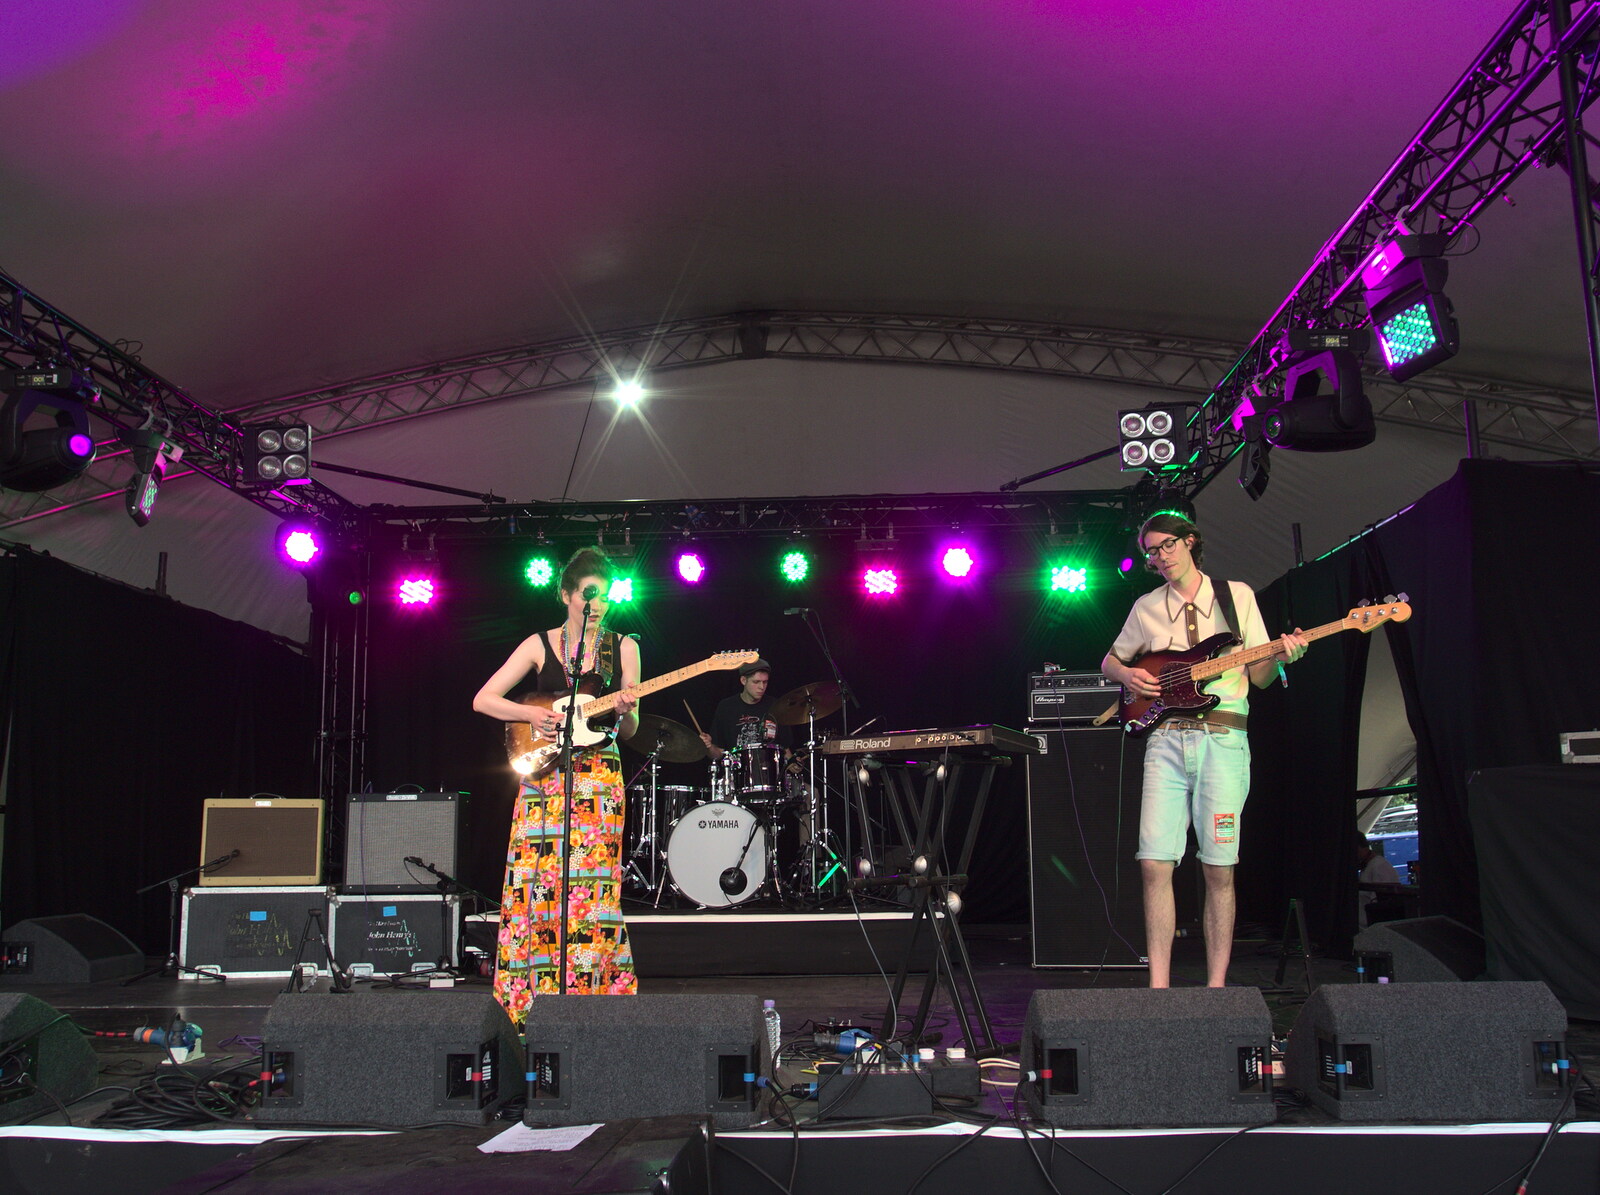 Daisy and Sam on stage from Latitude Festival, Henham Park, Southwold, Suffolk - 17th July 2014